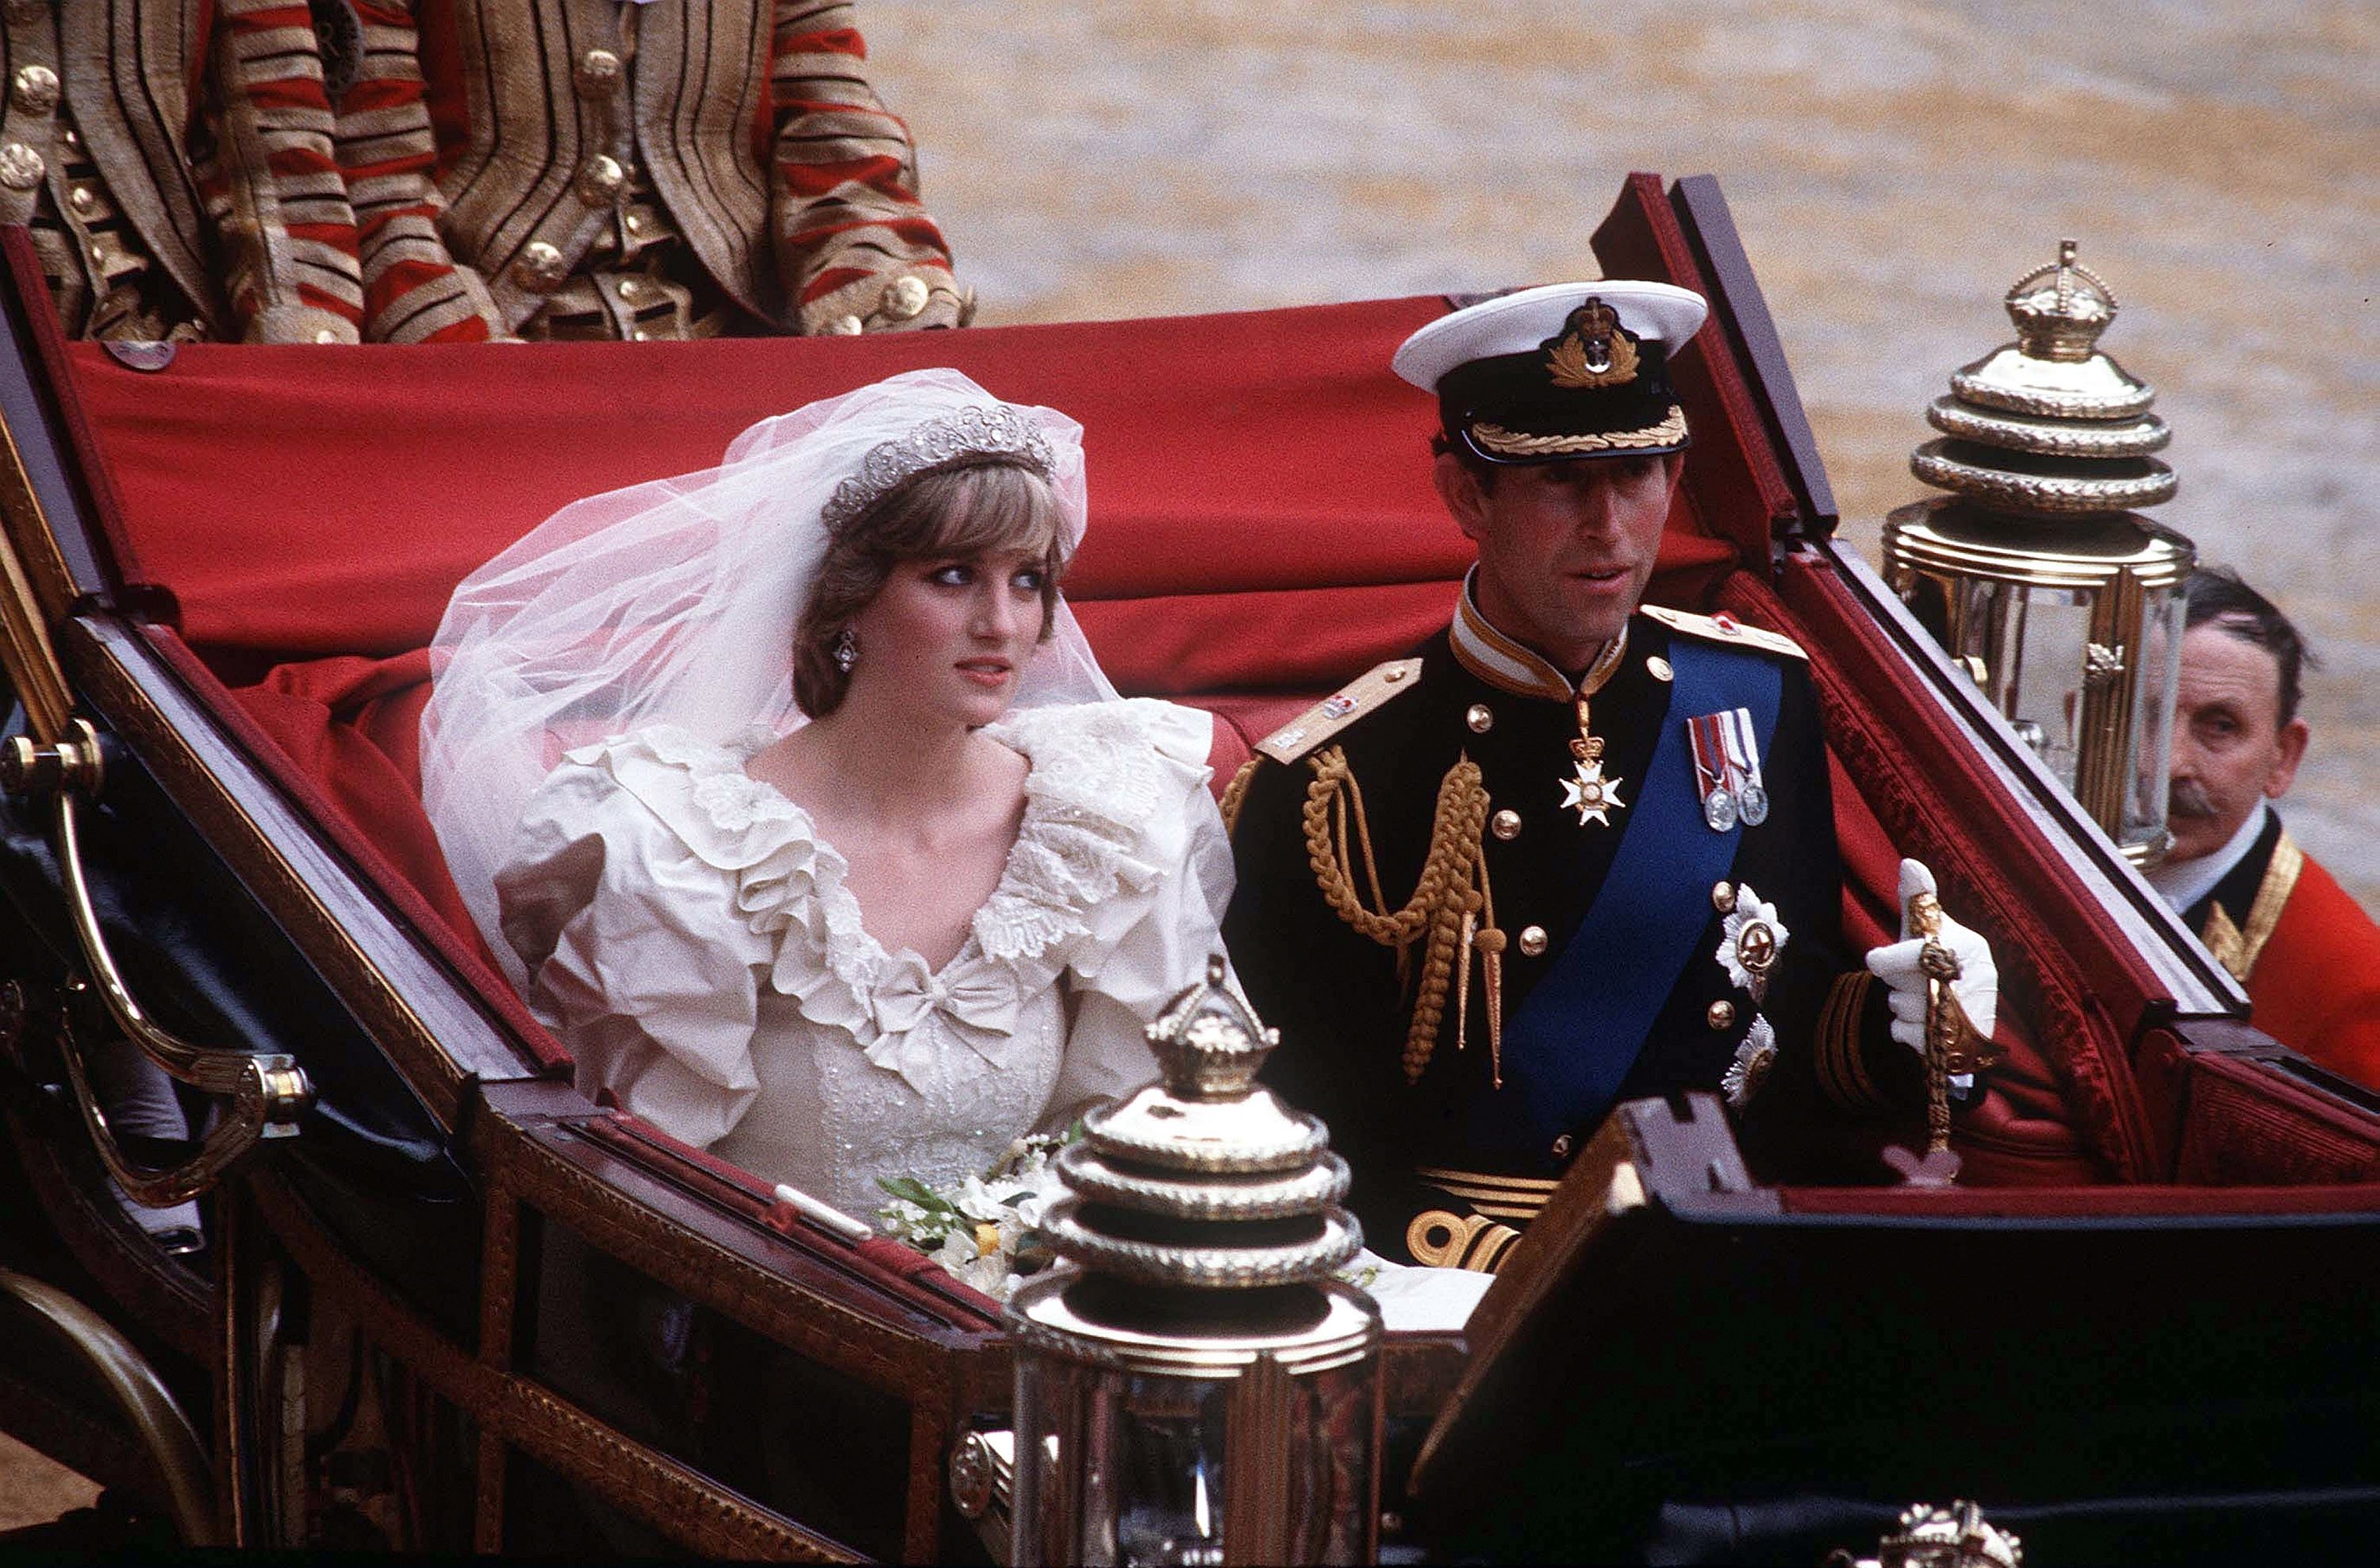 Prince Charles and Princess Diana on their wedding day in 1991 | Photo: Getty Images